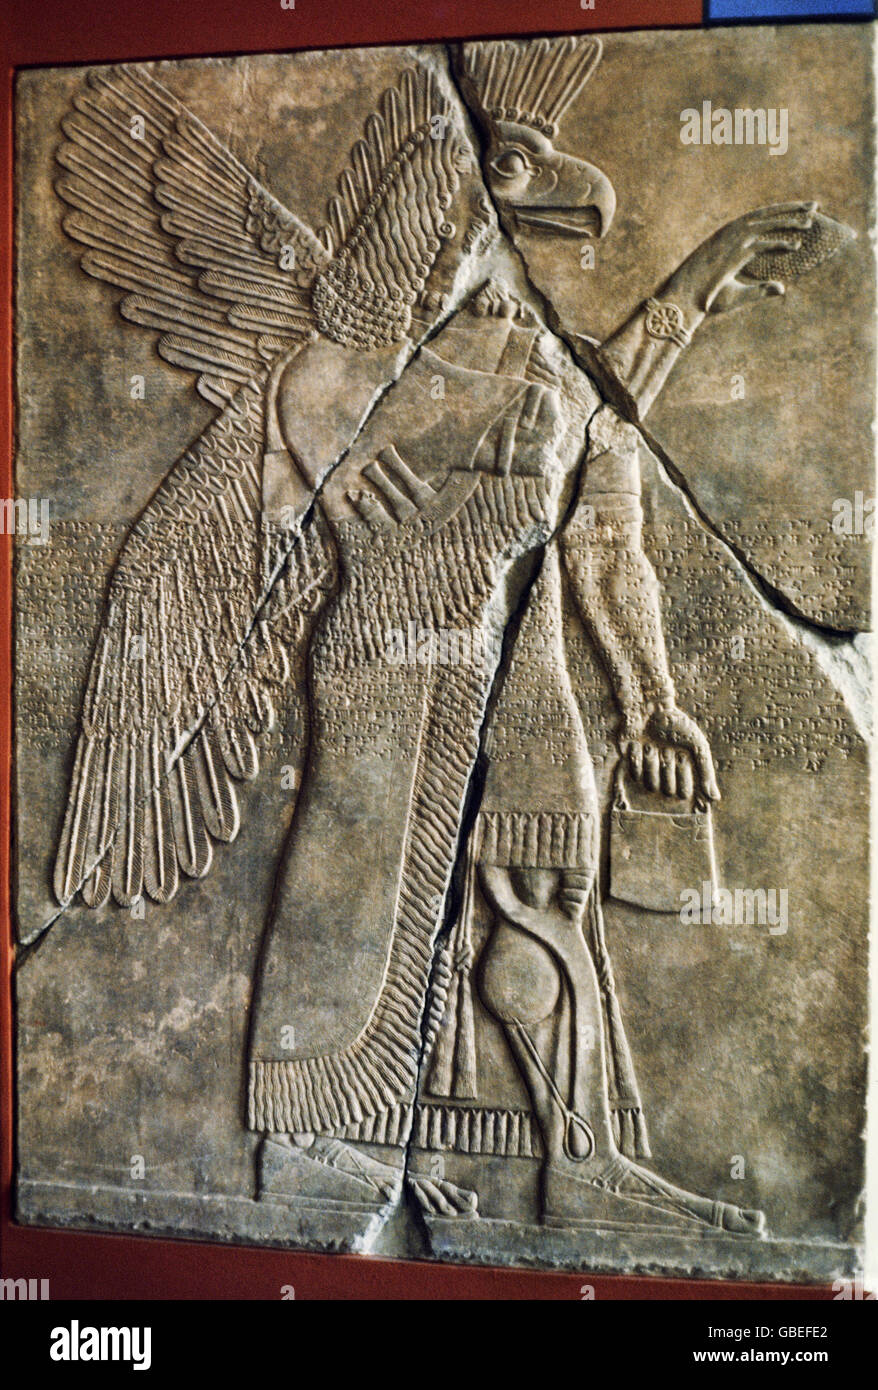 geography / travel, Mesopotamia, Assyria, Assur, demon, relief from palace of Assurnasirpal II (883 - 859 BC), historic, historical, Asia, Middle East, fine arts, winged, wings, daemon, demons, daemons, chimera, creature, ancient world, Additional-Rights-Clearences-Not Available Stock Photo